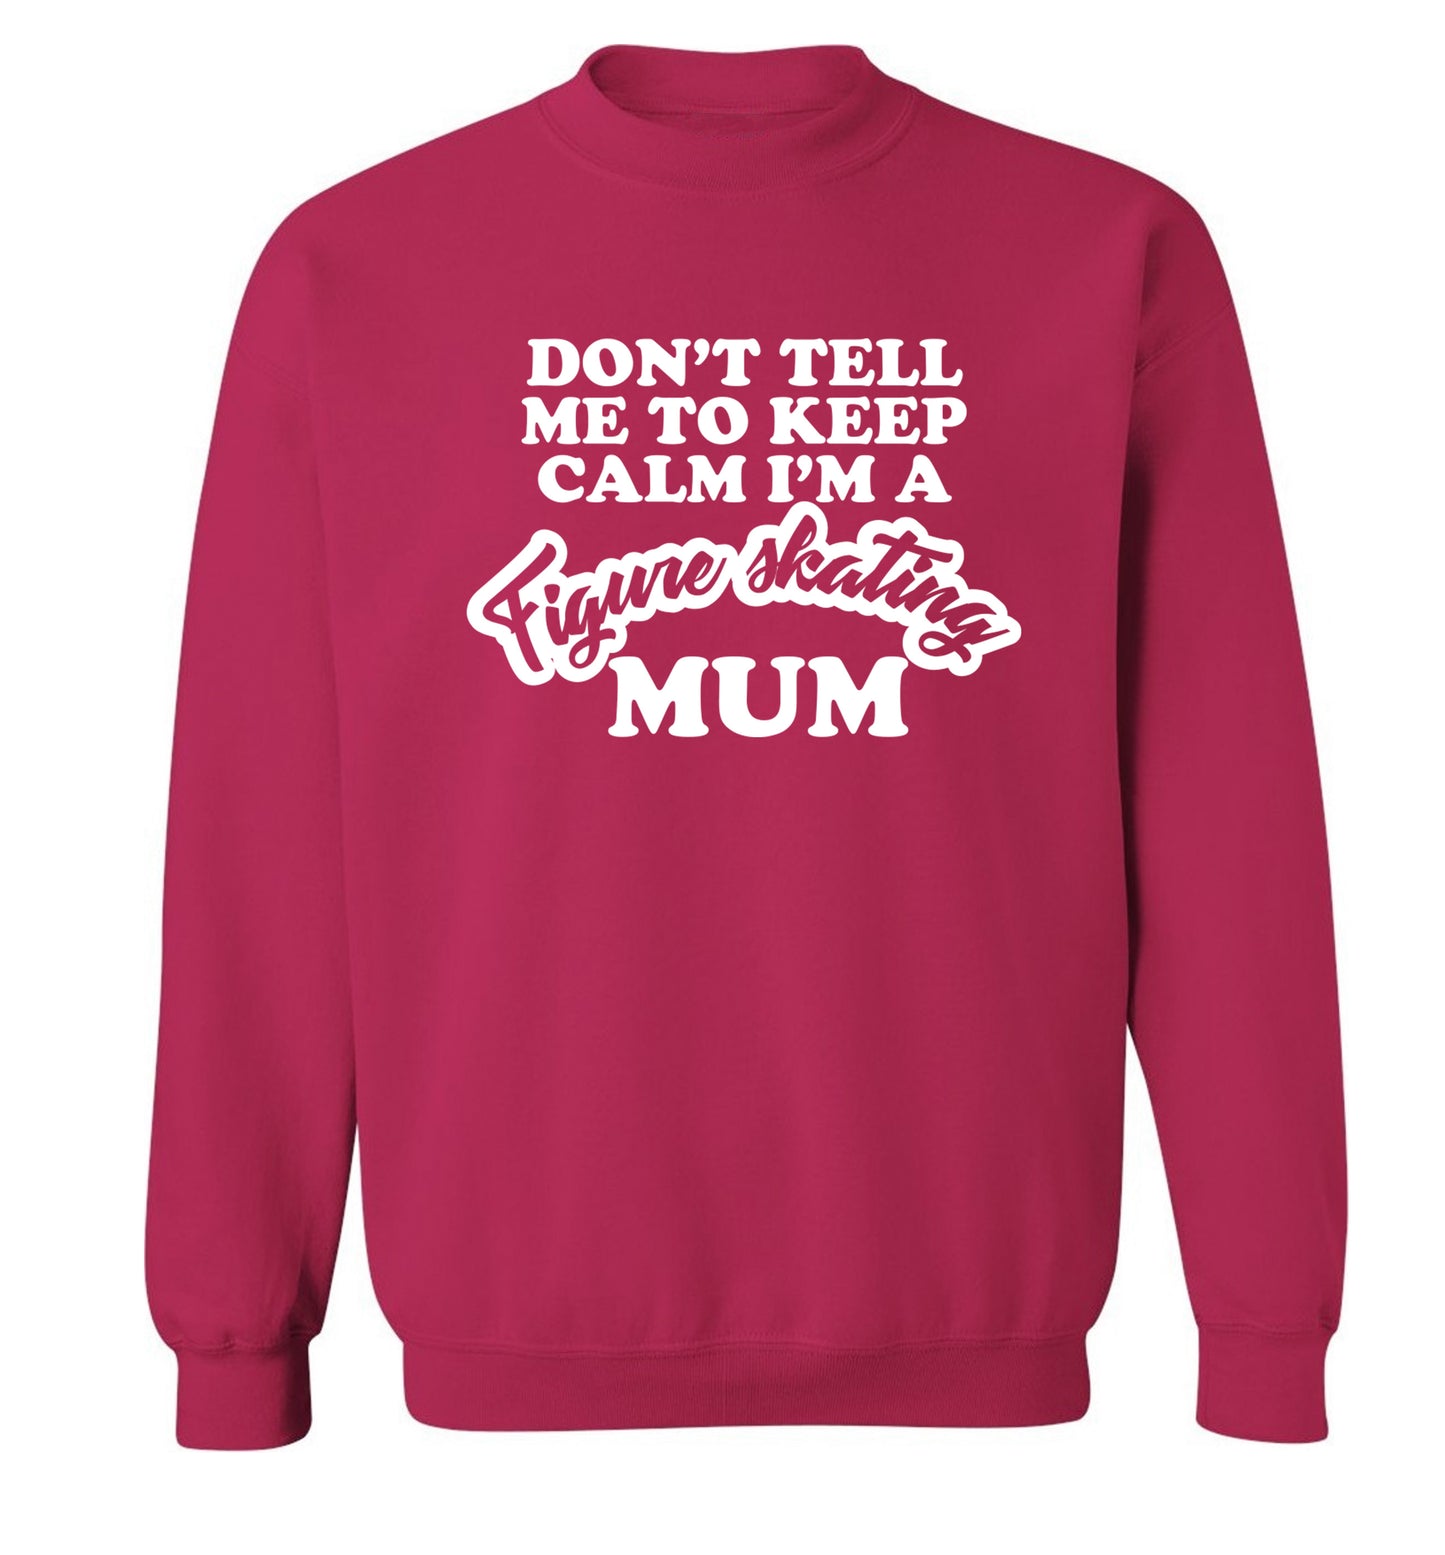 Don't tell me to keep calm I'm a figure skating mum Adult's unisexpink Sweater 2XL